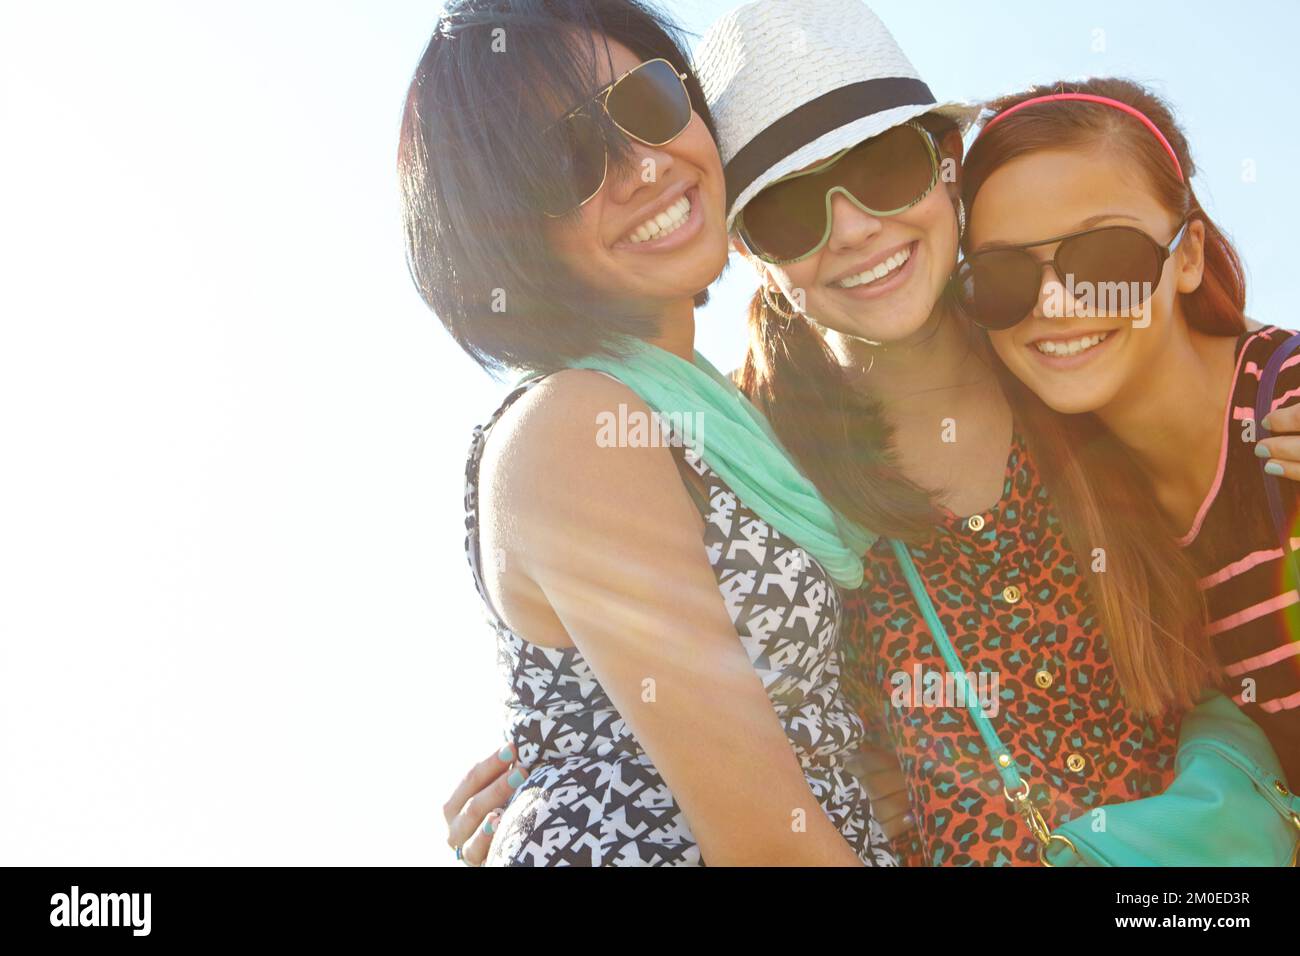 Friends are the most valuable possession. Closeup shot of a group of teenage girls smiling with their arms around each others shoulders. Stock Photo